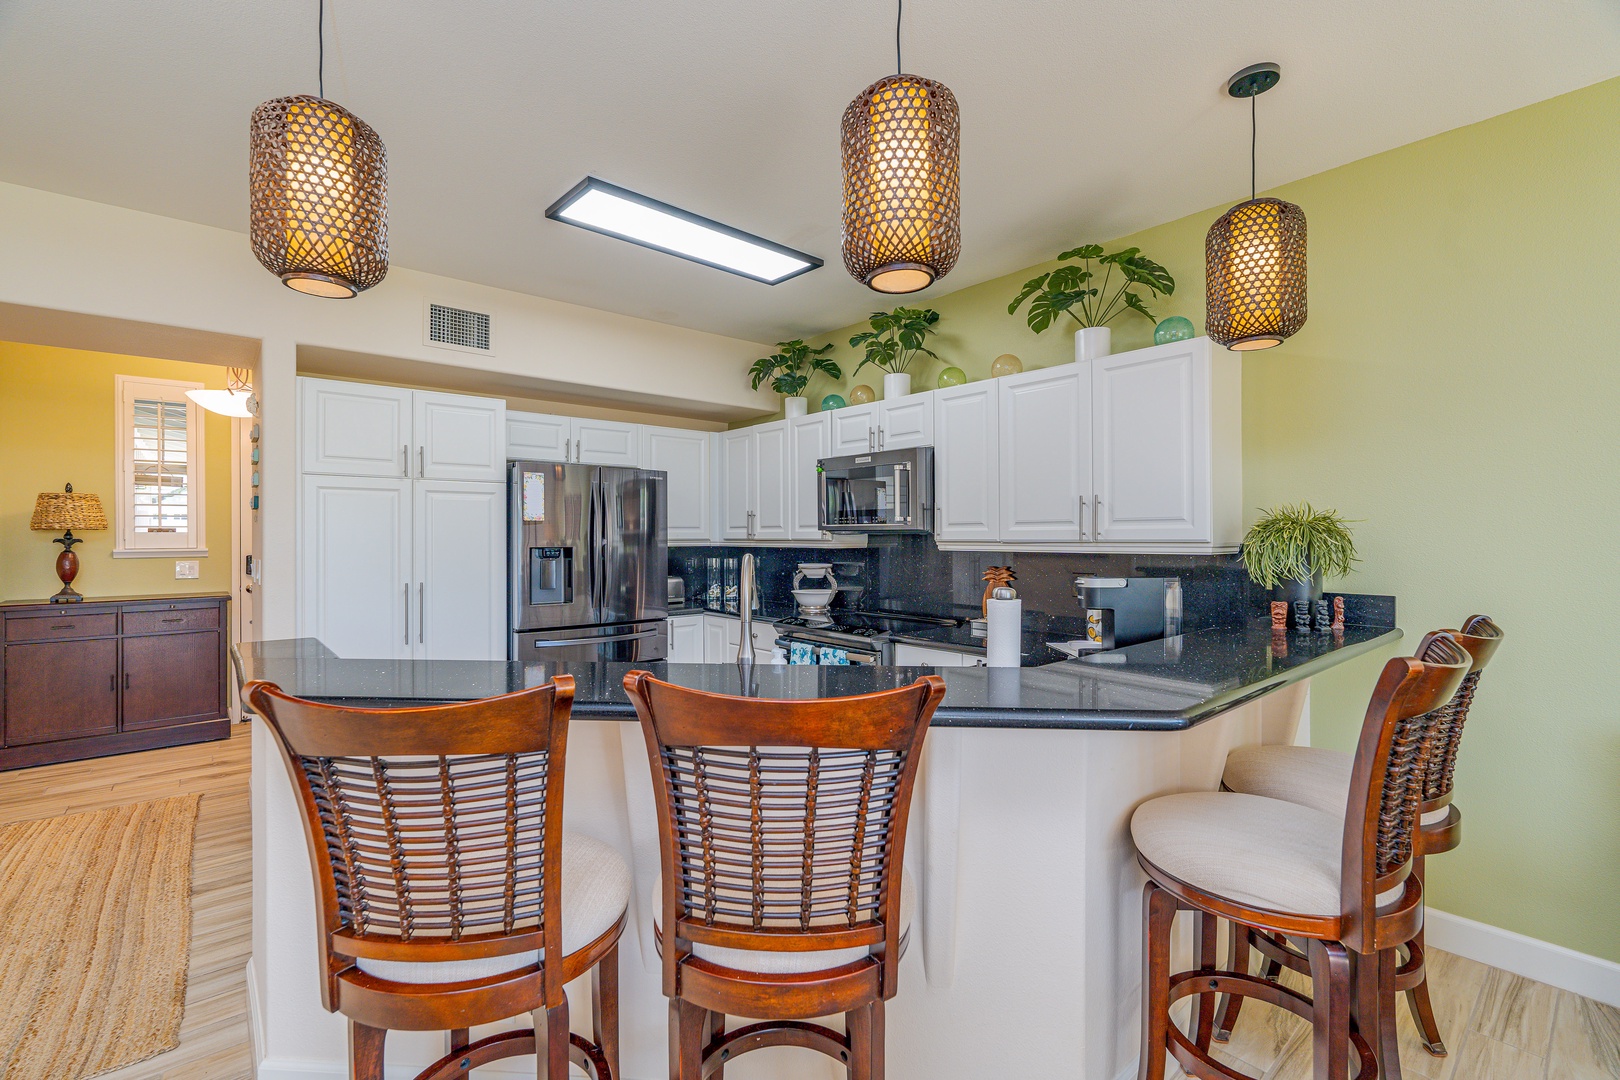 Kapolei Vacation Rentals, Ko Olina Kai 1097C - Breakfast bar with four seats for quick meals and entertainment.